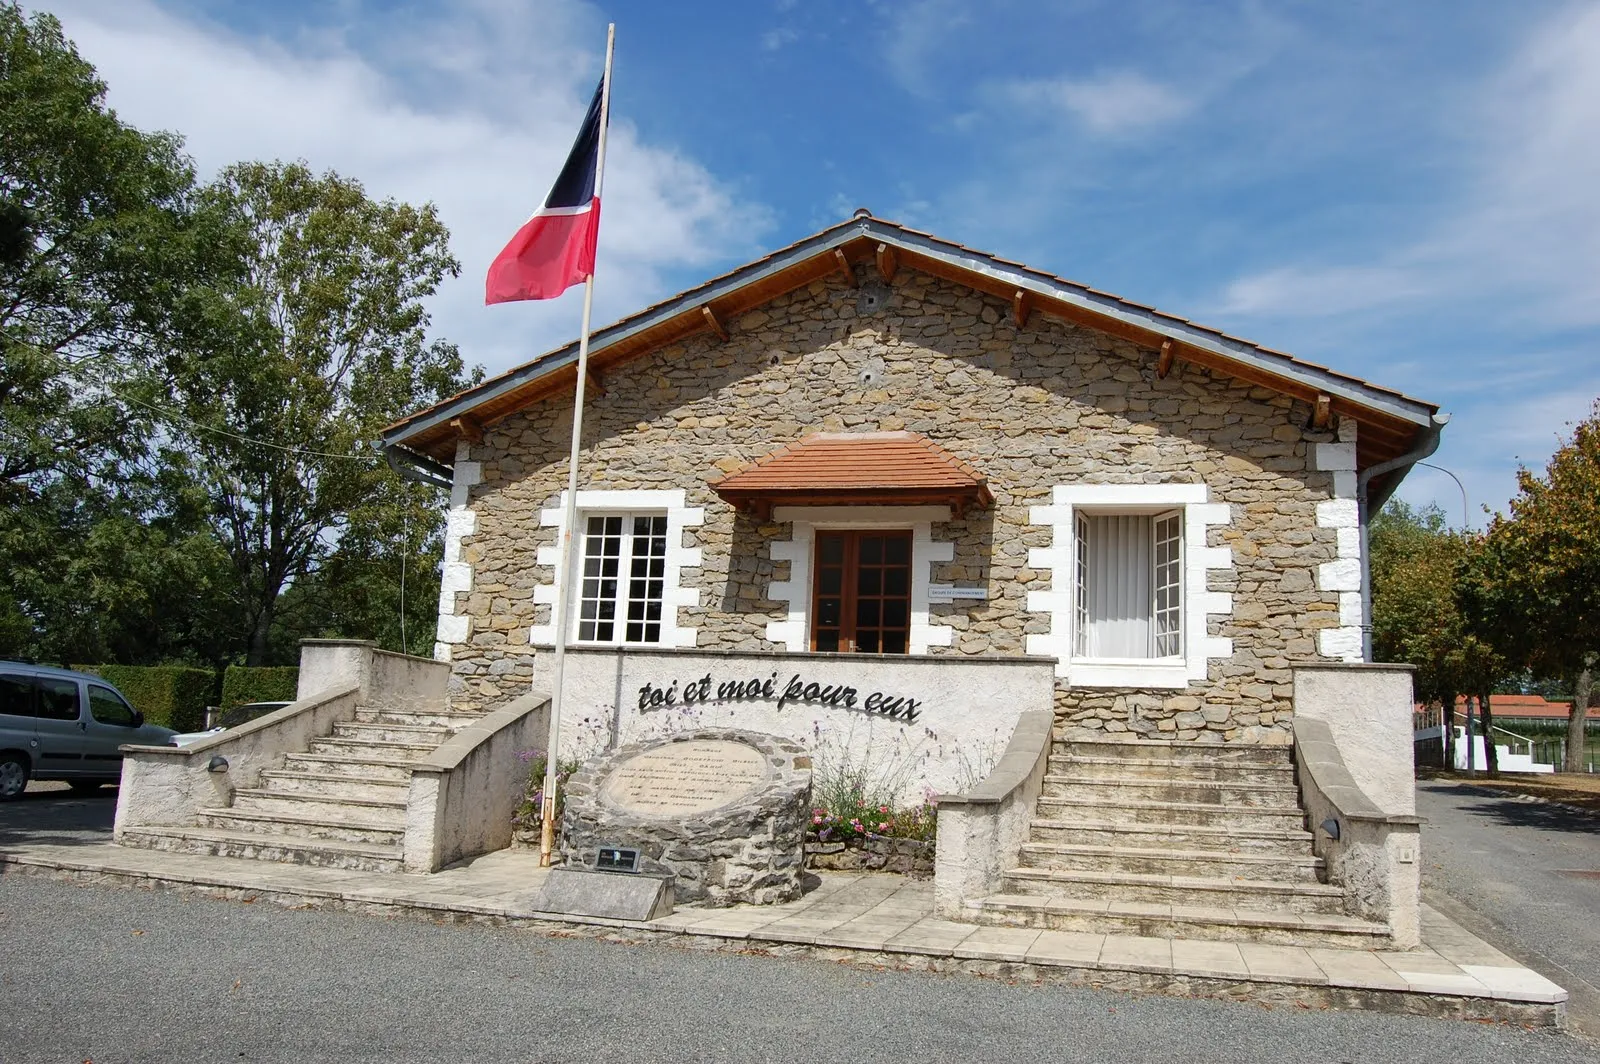 Photo showing: French Gendarmerie Canine National Training Centre, a training center for canine agent located since 1945 in Gramat, Quercy, France